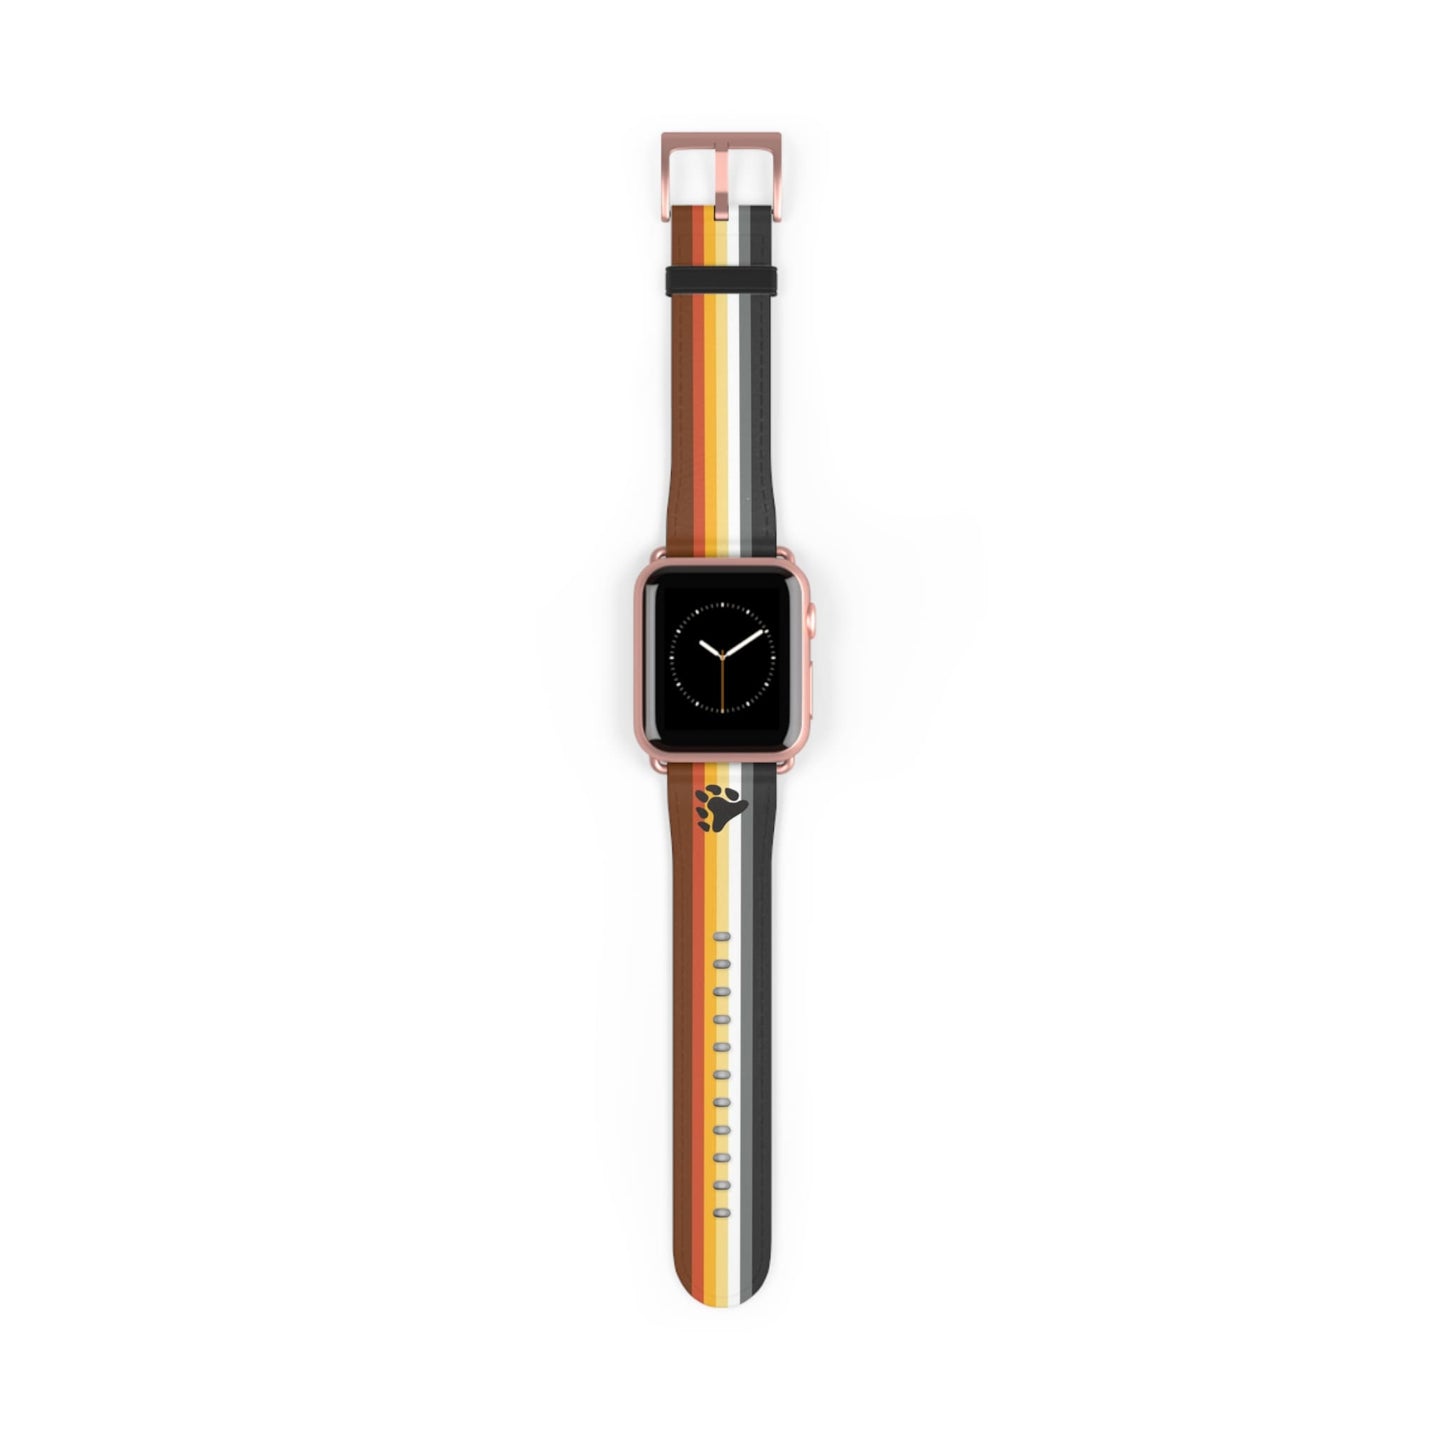 bear pride watch band for Apple iwatch, rose gold